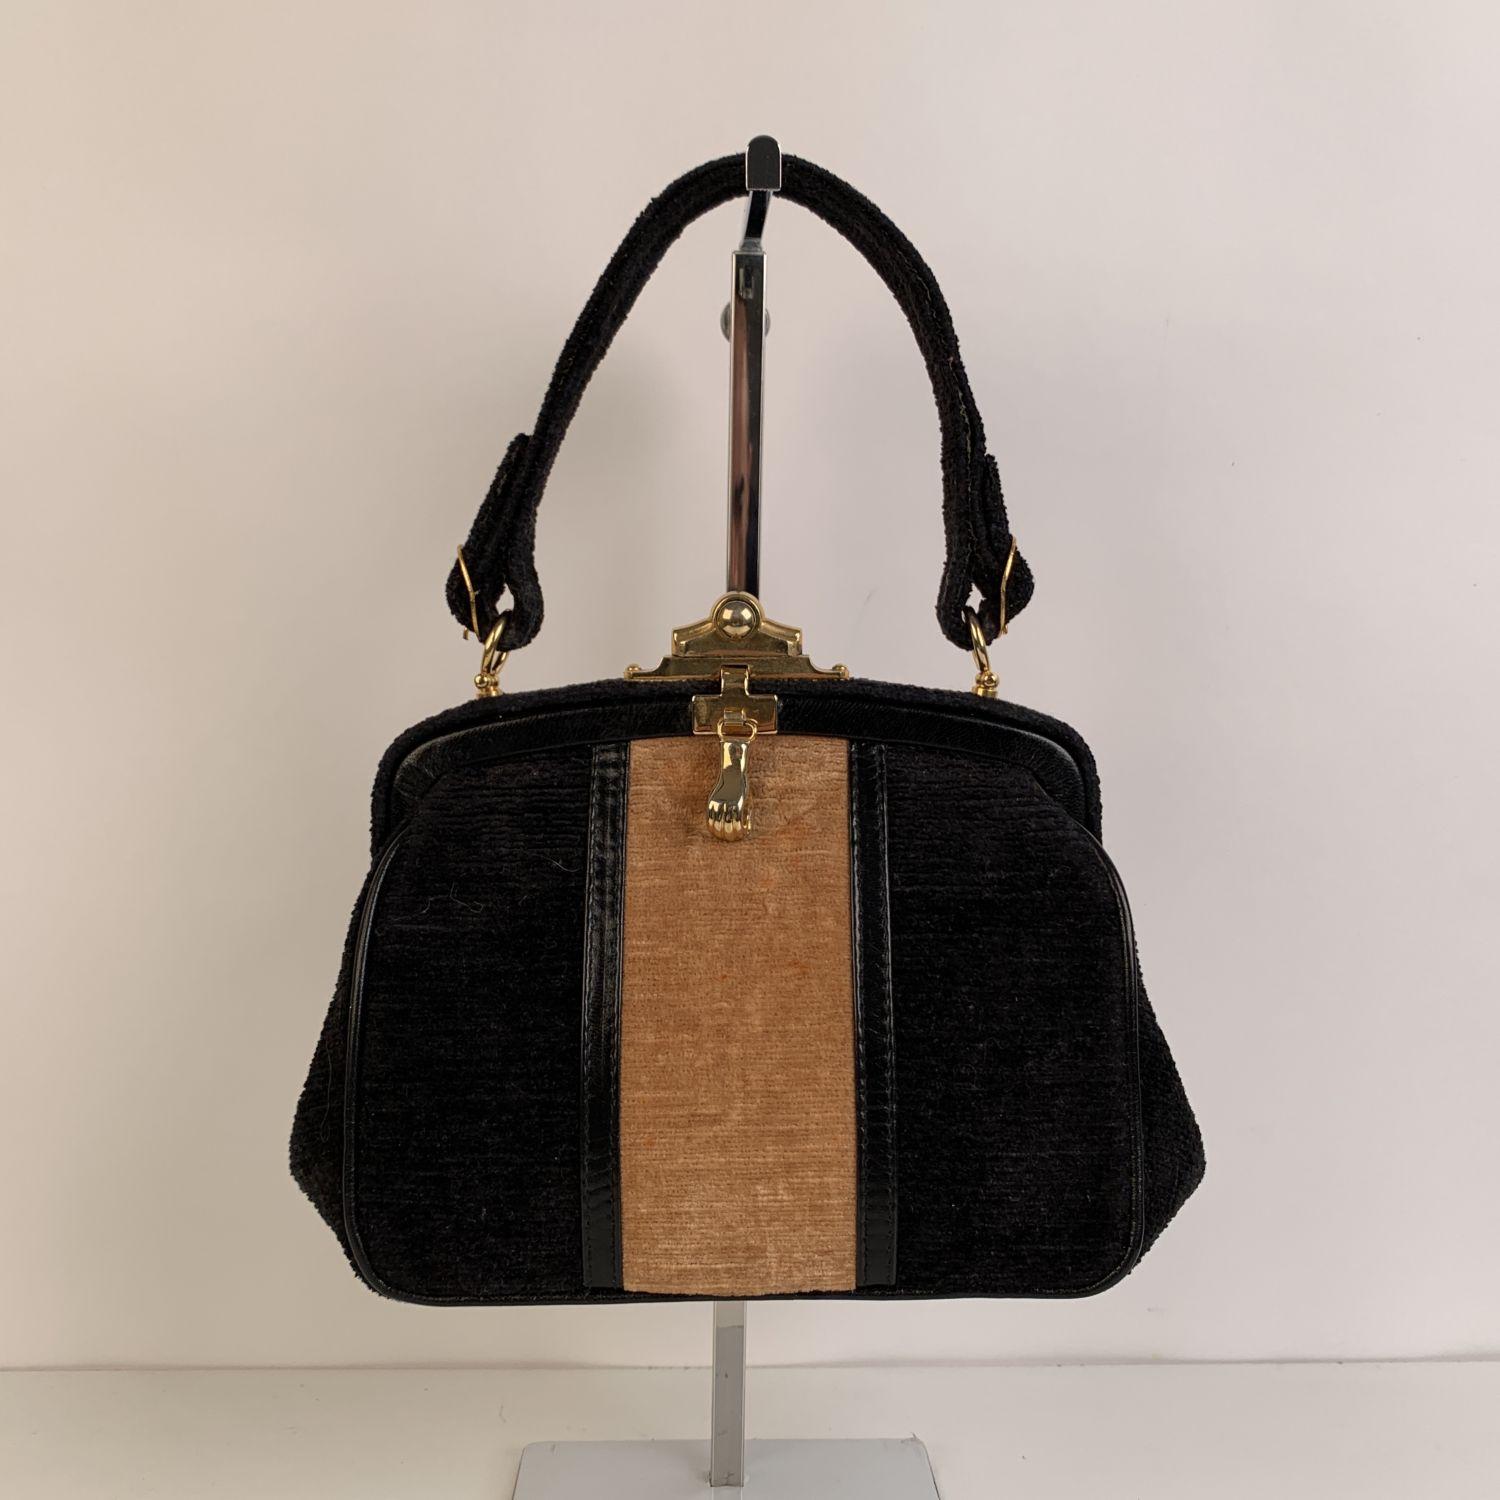 ROBERTA DI CAMERINO velvet handbag. Classic style in brown and beige velvet with black leather trim. Gold metal hardware. It features a leather top-handle and a push-lock closure. Gold metal hand's pendant on the front. 1 side pocket and 1 side zip